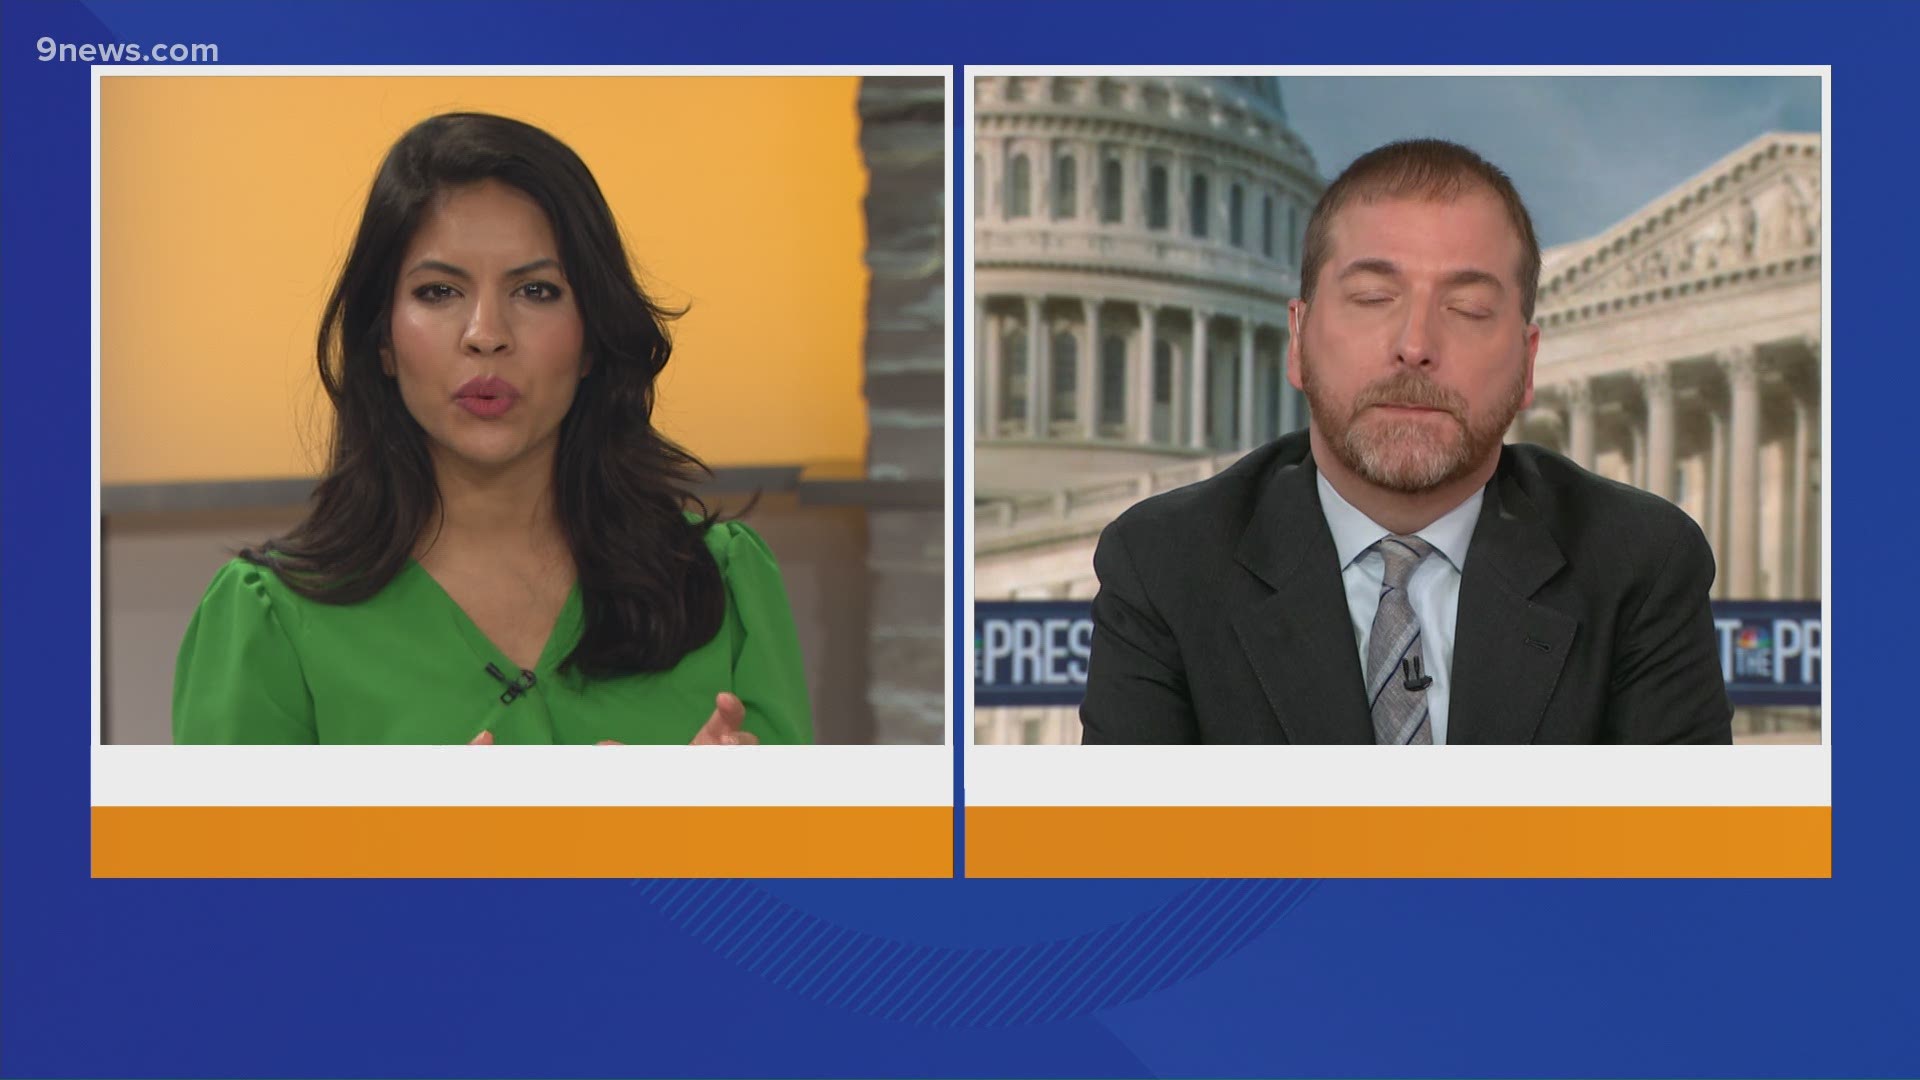 NBC's Chuck Todd talks about the state of the Republican Party, and COVID-19 vaccines and restrictions.